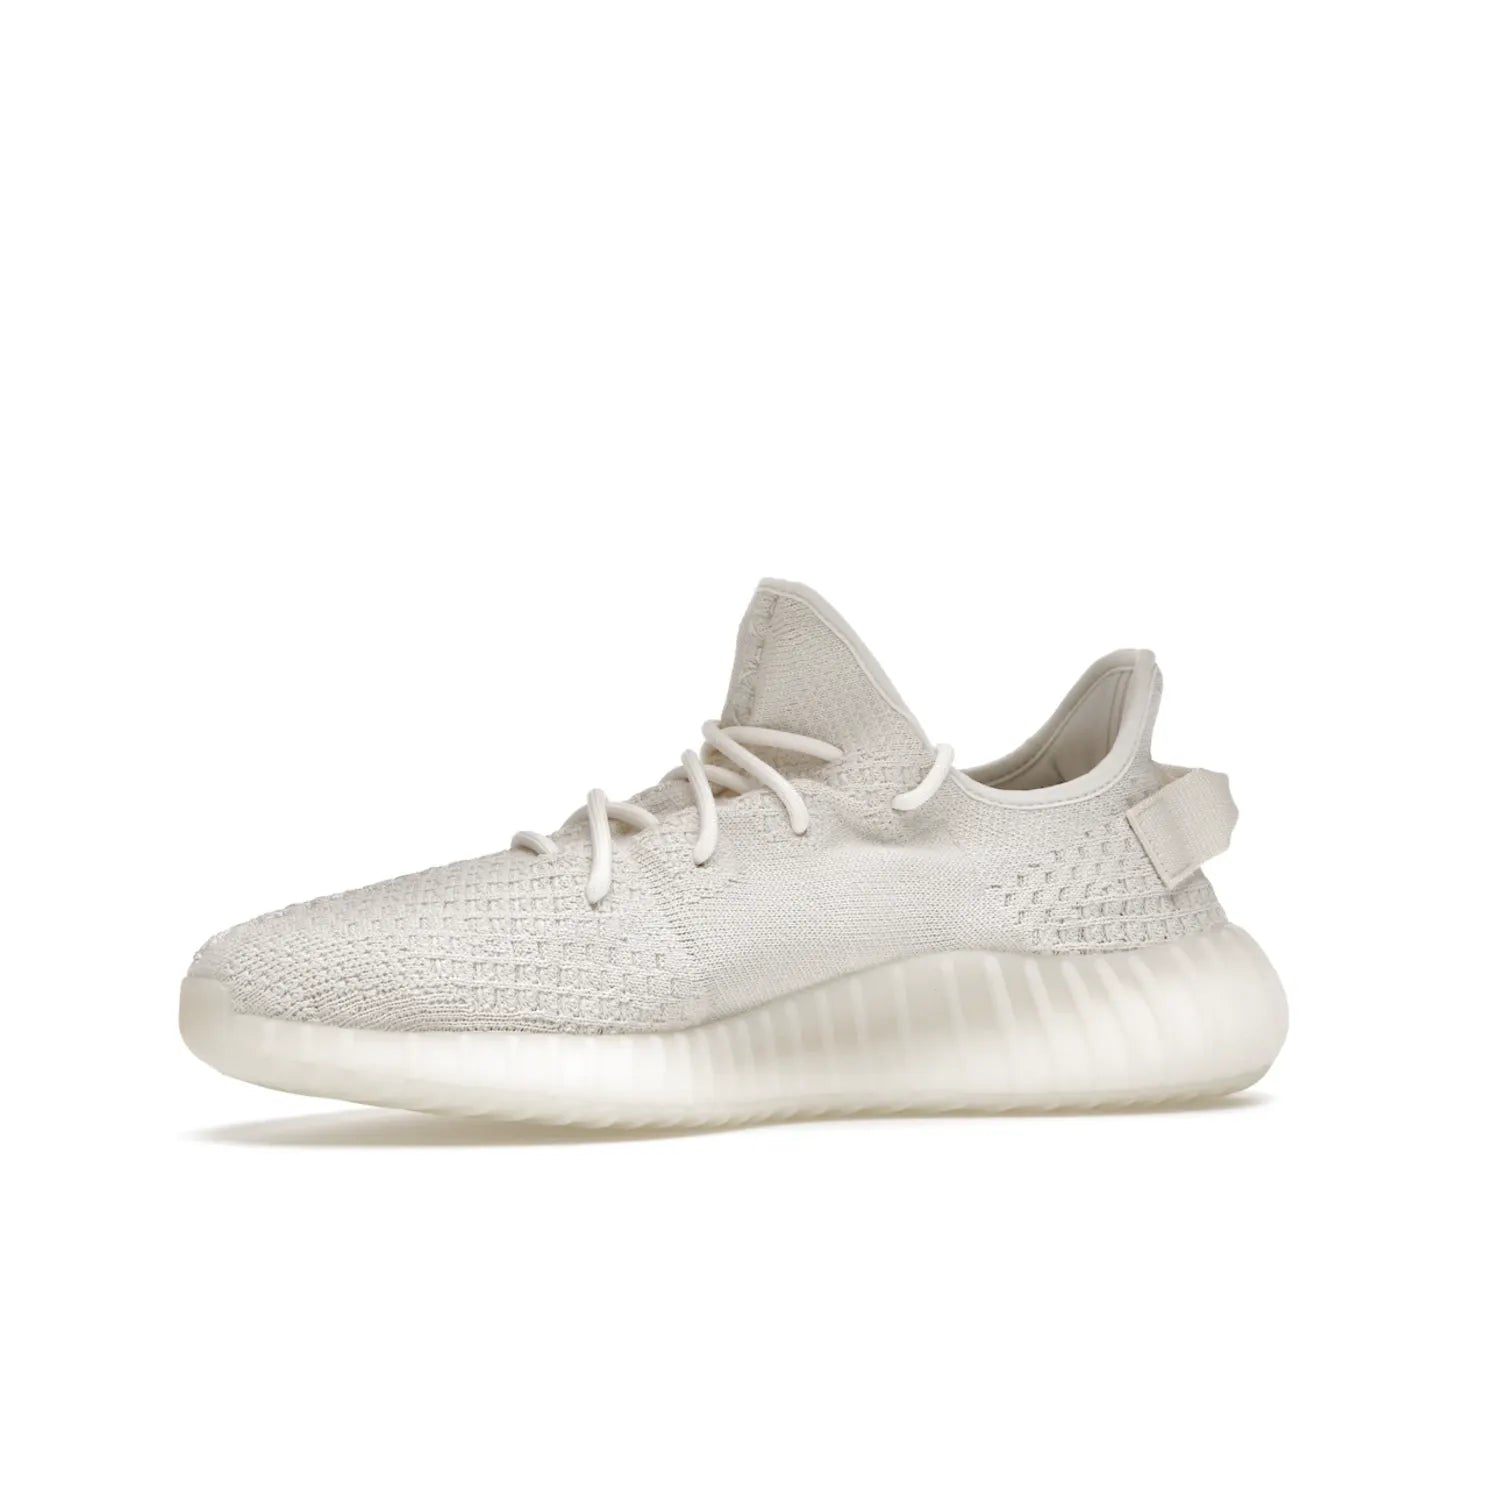 adidas Yeezy Boost 350 V2 Bone - Image 17 - Only at www.BallersClubKickz.com - Grab the stylish and comfortable adidas Yeezy Boost 350 V2 Bone in March 2022. This sneaker features a triple white Primeknit upper, mesh side stripes and canvas heel tabs, sitting atop a semi-translucent sole with Boost technology. Sure to keep your feet comfortable and stylish!